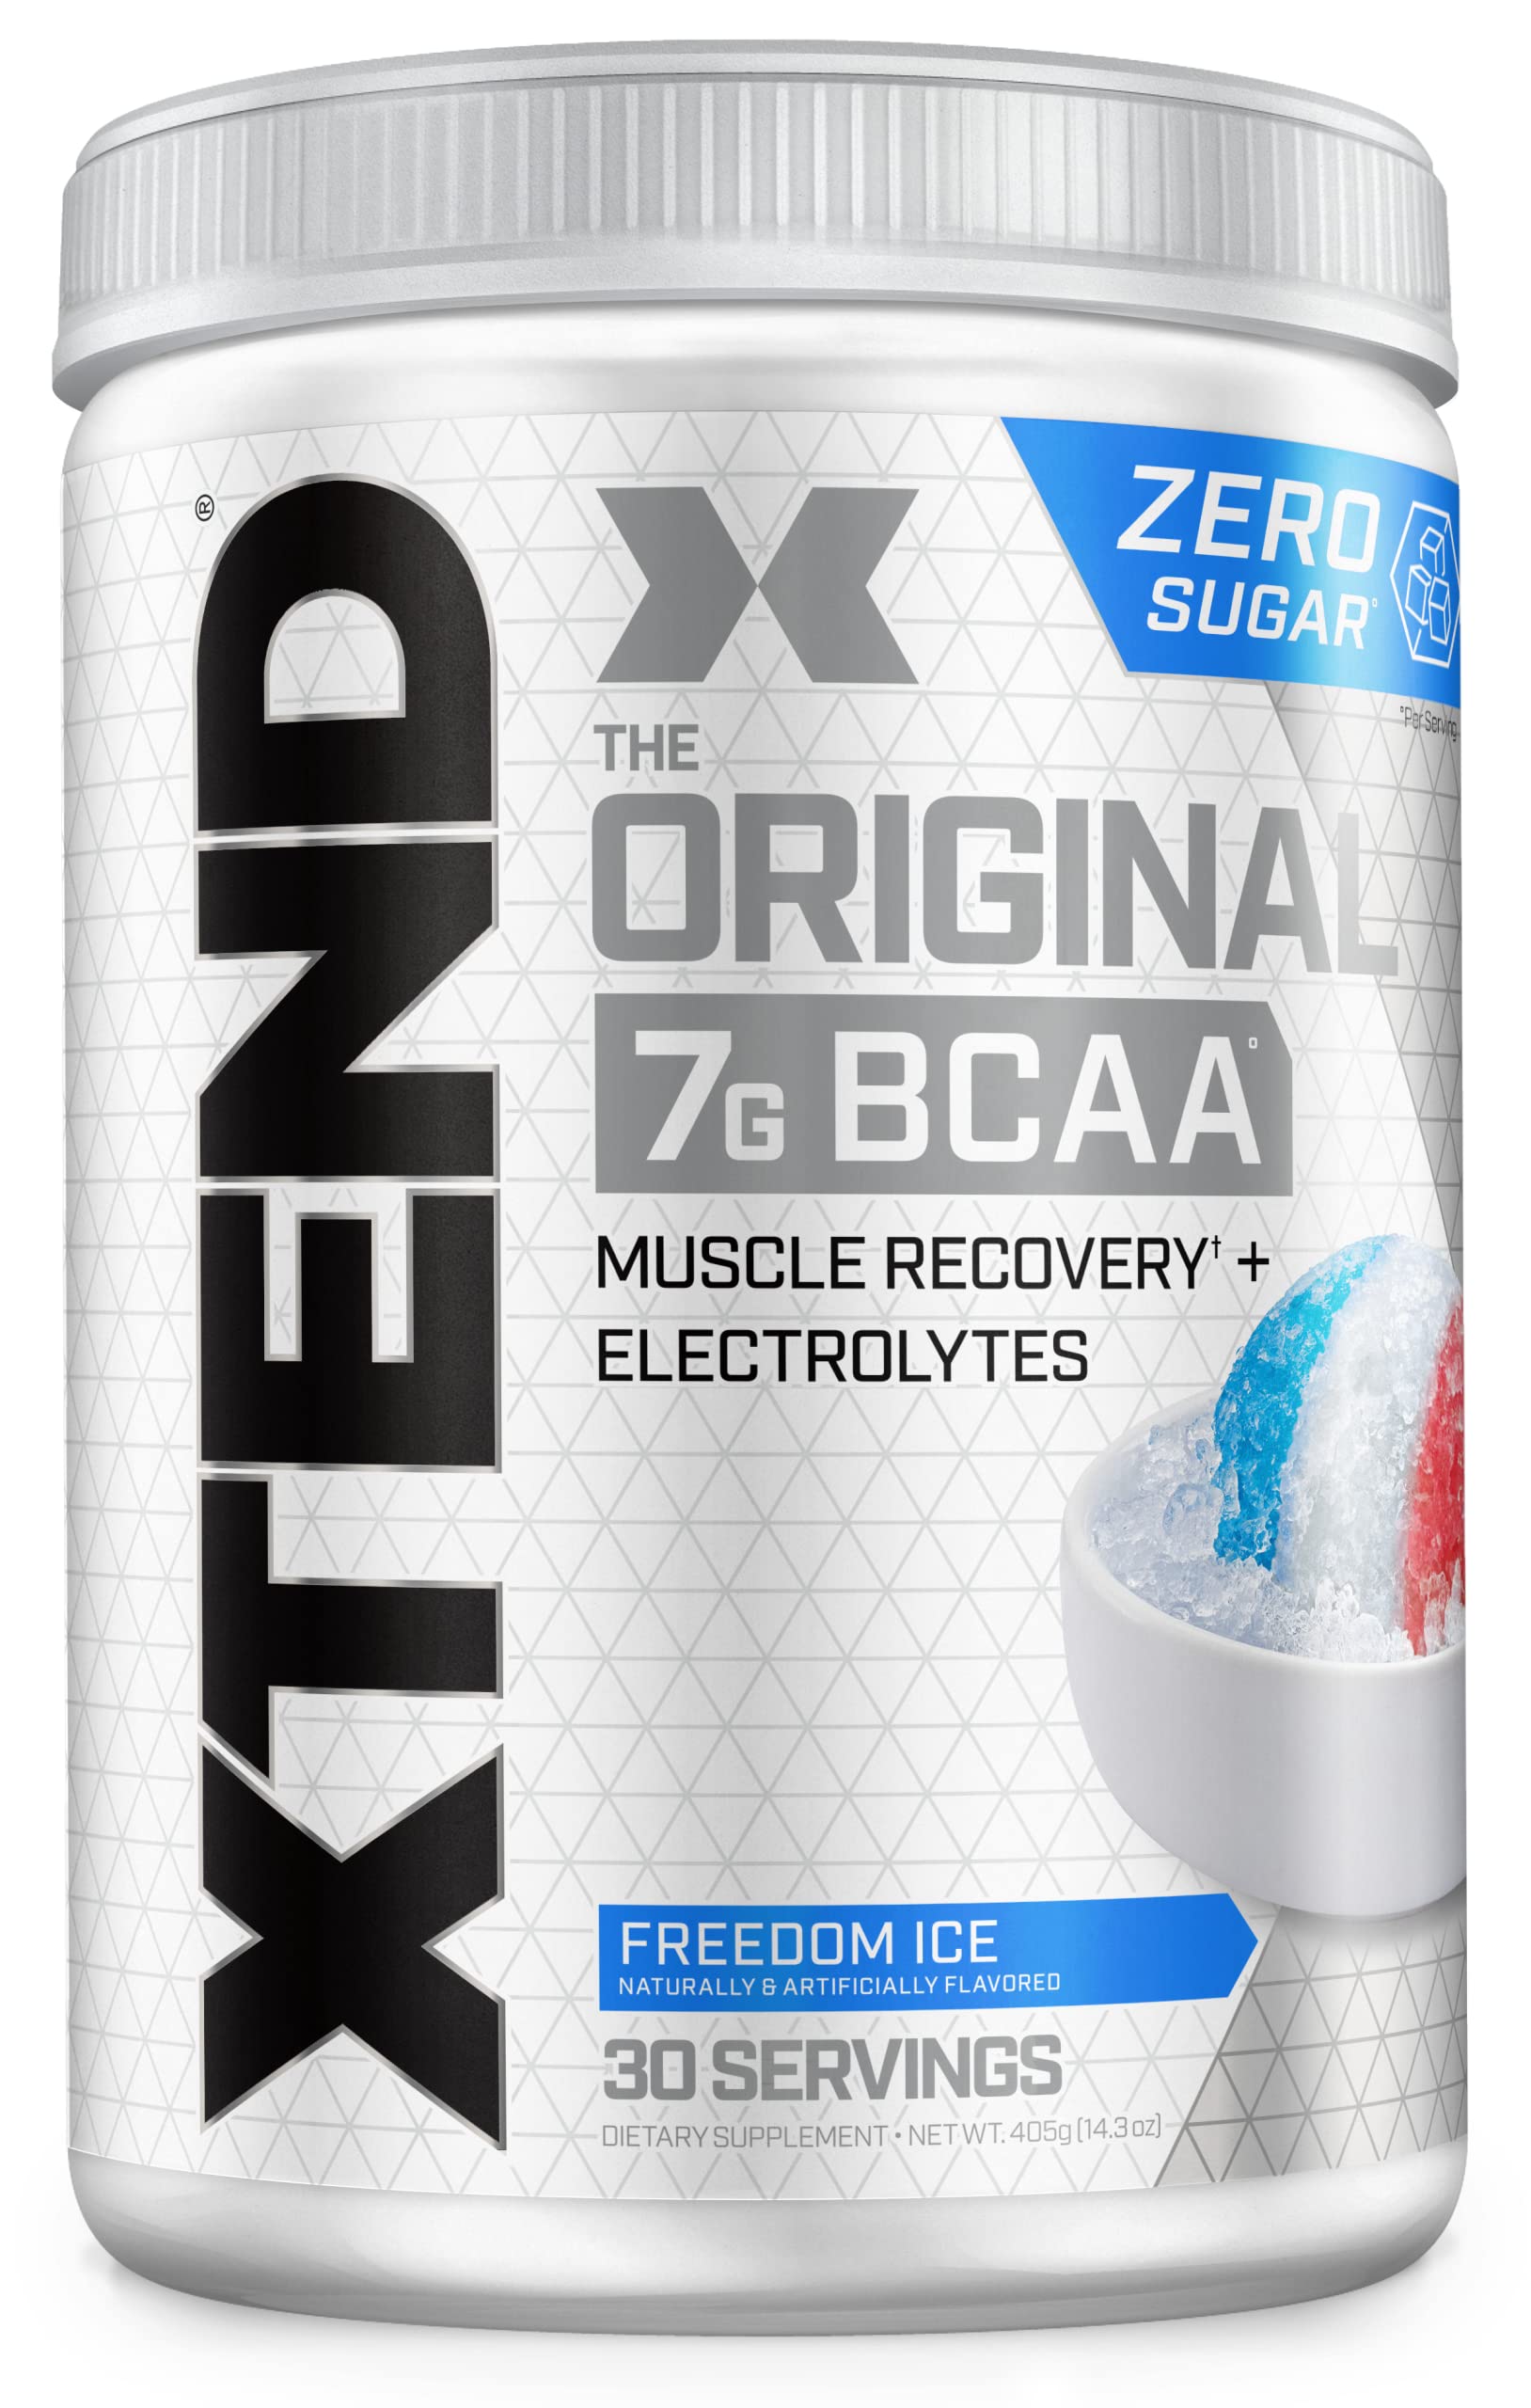 XTEND Original BCAA Powder Freedom Ice | Sugar Free Post Workout Muscle Recovery Drink with Amino Acids | 7g BCAAs for Men & Women | 30 Servings